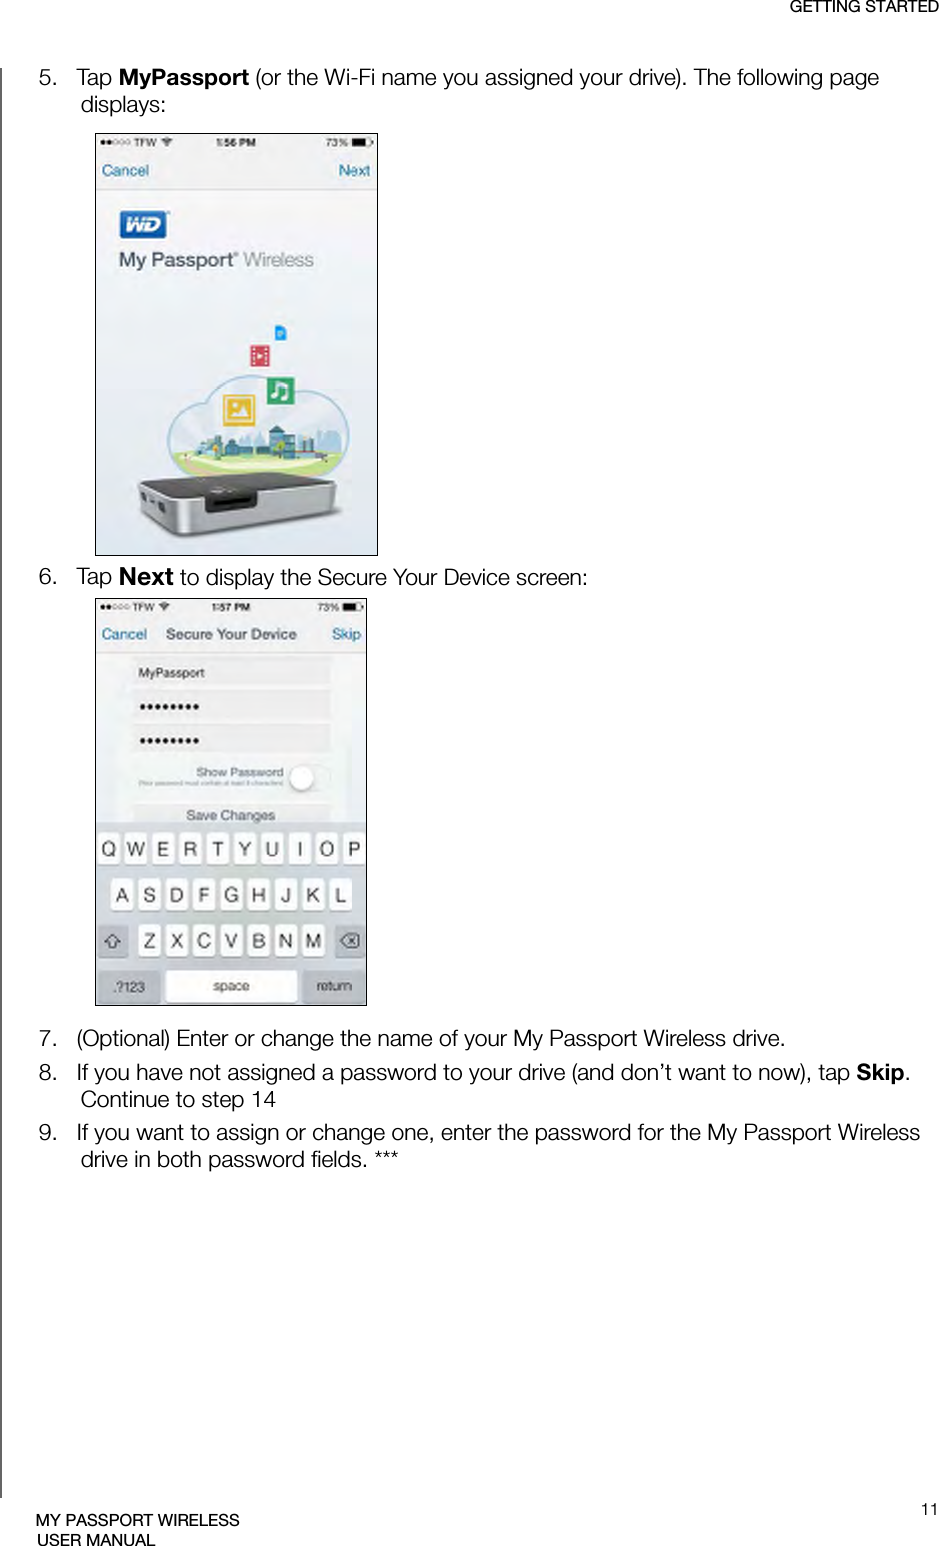 GETTING STARTED11MY PASSPORT WIRELESSUSER MANUAL5.   Tap MyPassport (or the Wi-Fi name you assigned your drive). The following page displays:6.   Tap Next to display the Secure Your Device screen:7.   (Optional) Enter or change the name of your My Passport Wireless drive.8.   If you have not assigned a password to your drive (and don’t want to now), tap Skip. Continue to step 149.   If you want to assign or change one, enter the password for the My Passport Wireless drive in both password fields. ***